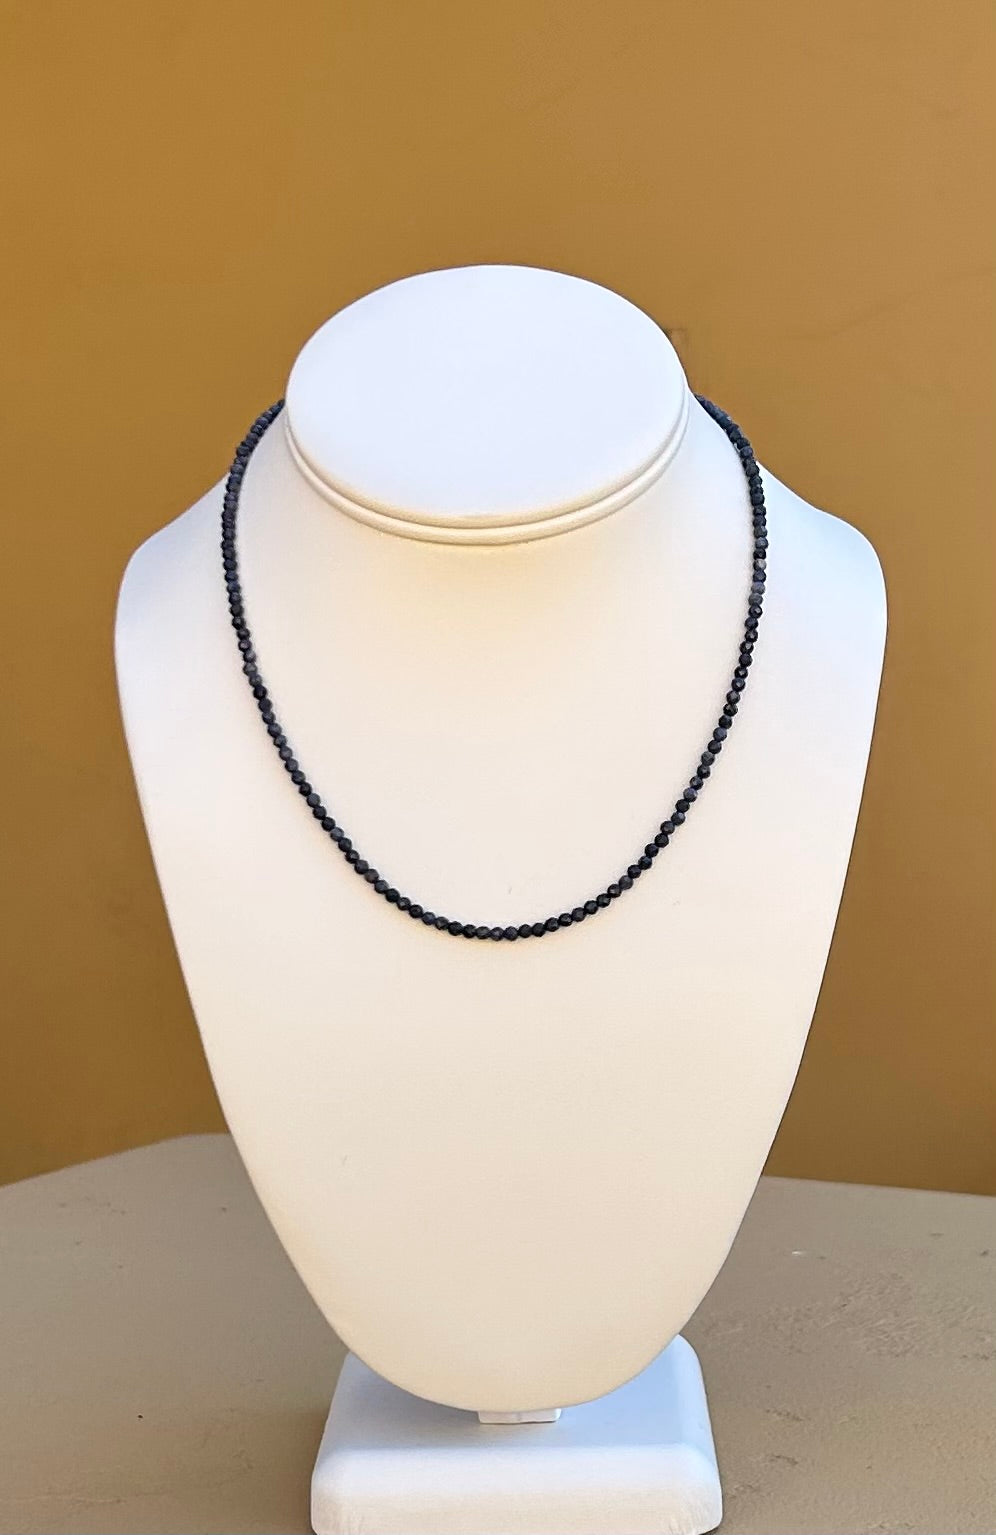 Necklace - Blue sapphire faceted and round 3mm beads with sterling silver clasp